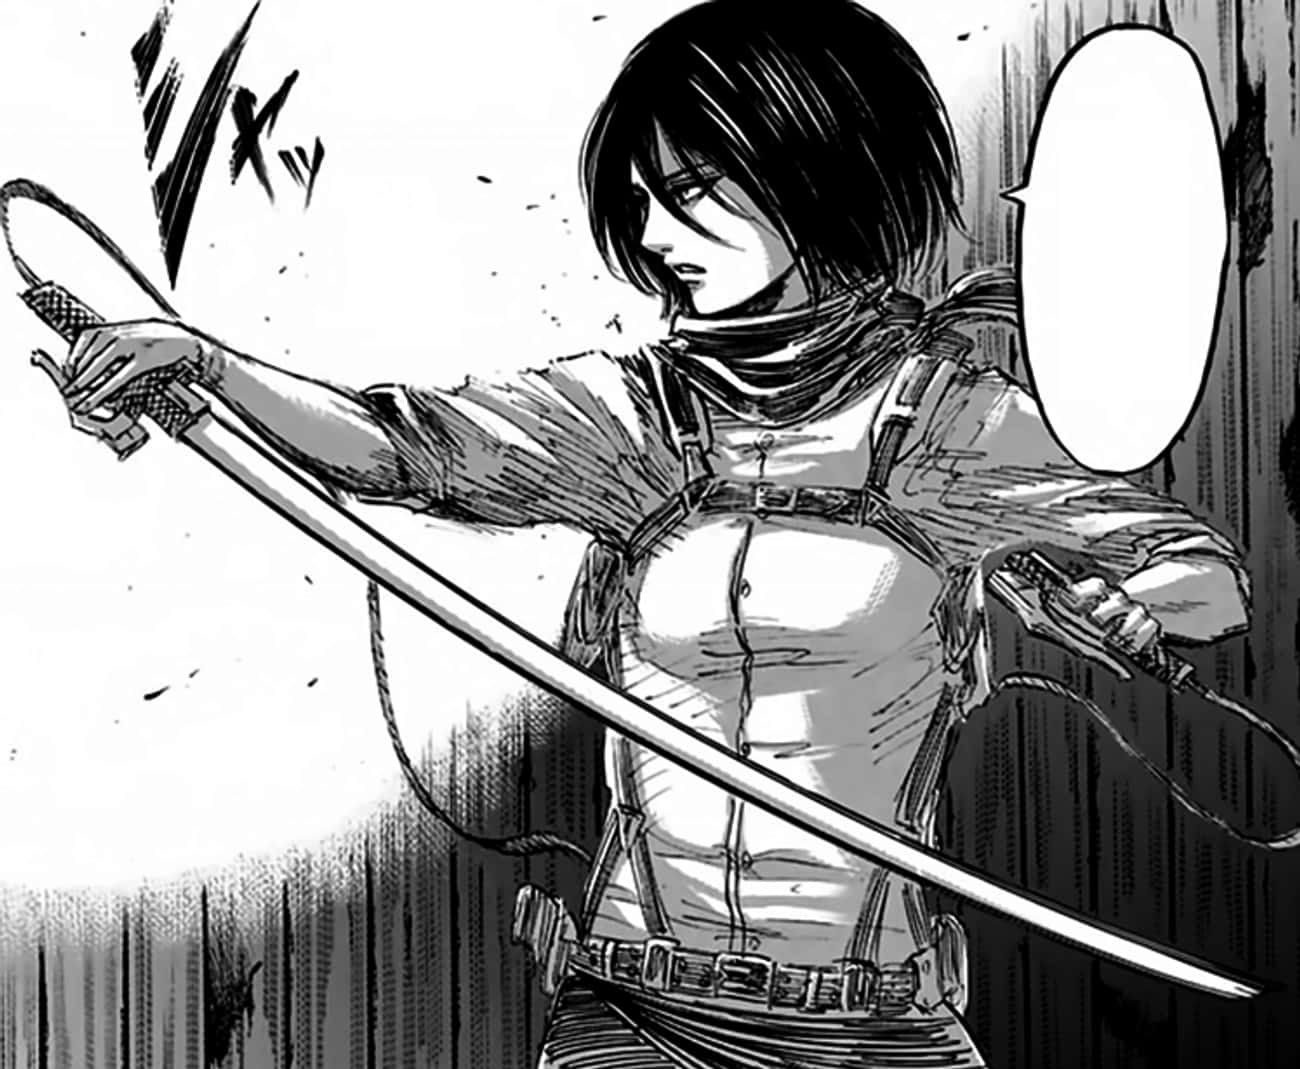 Mikasa's Personality Is More Well-Rounded In The Manga